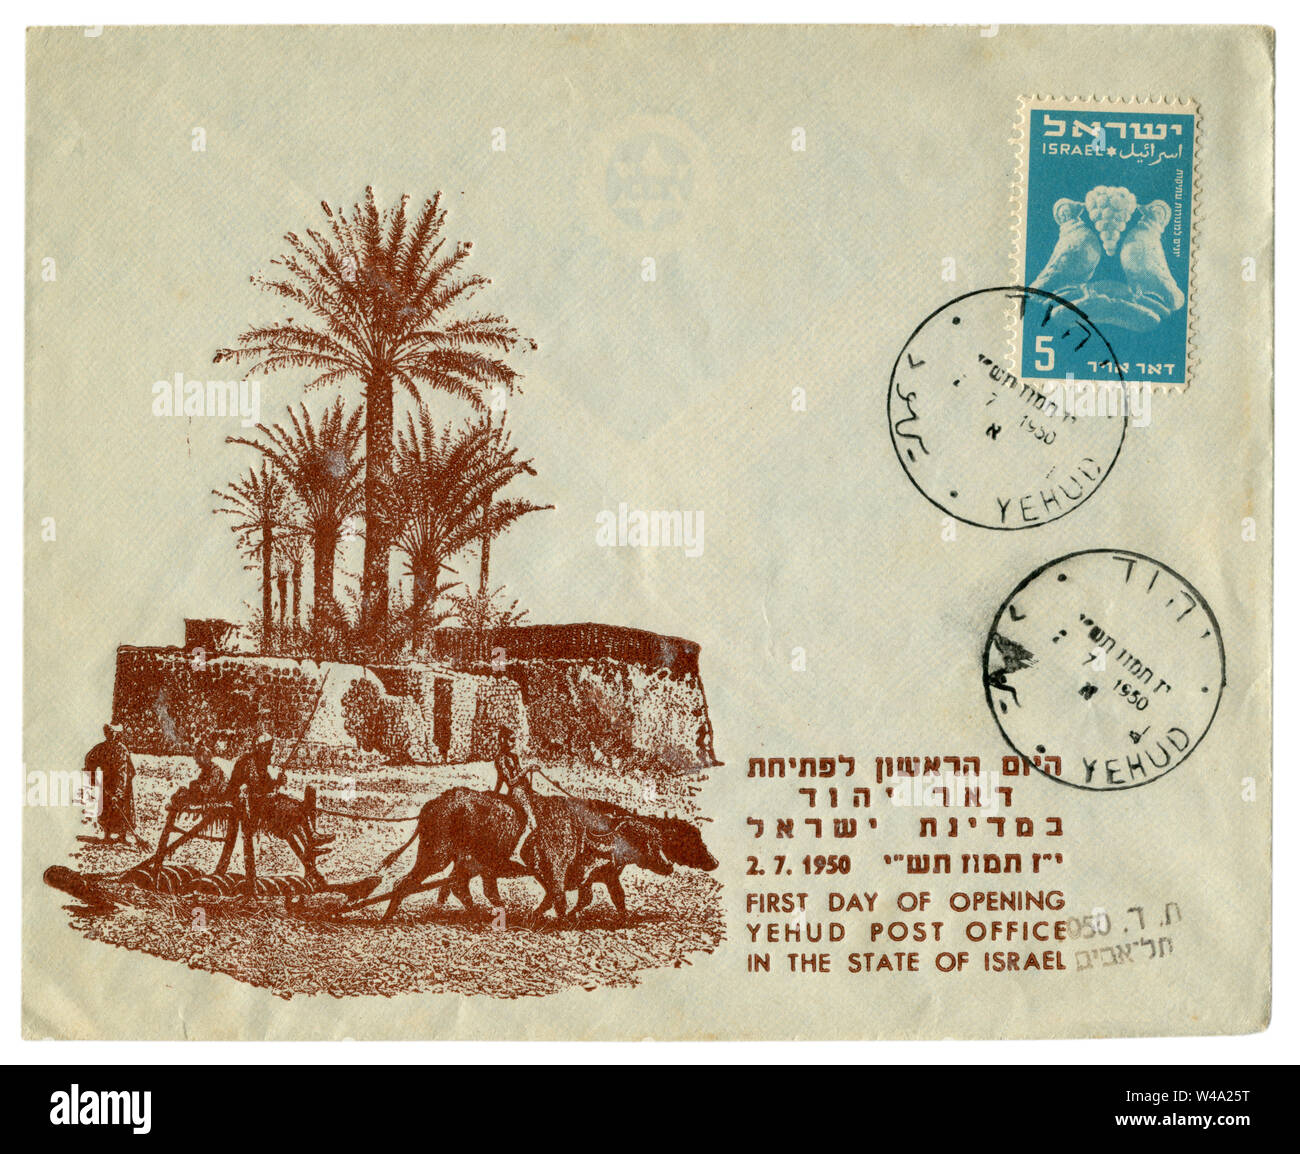 Yehud, Israel - 2 July 1950: Israeli historical envelope: cover with cachet first day of opening post office, the villagers plowing the land with oxen Stock Photo